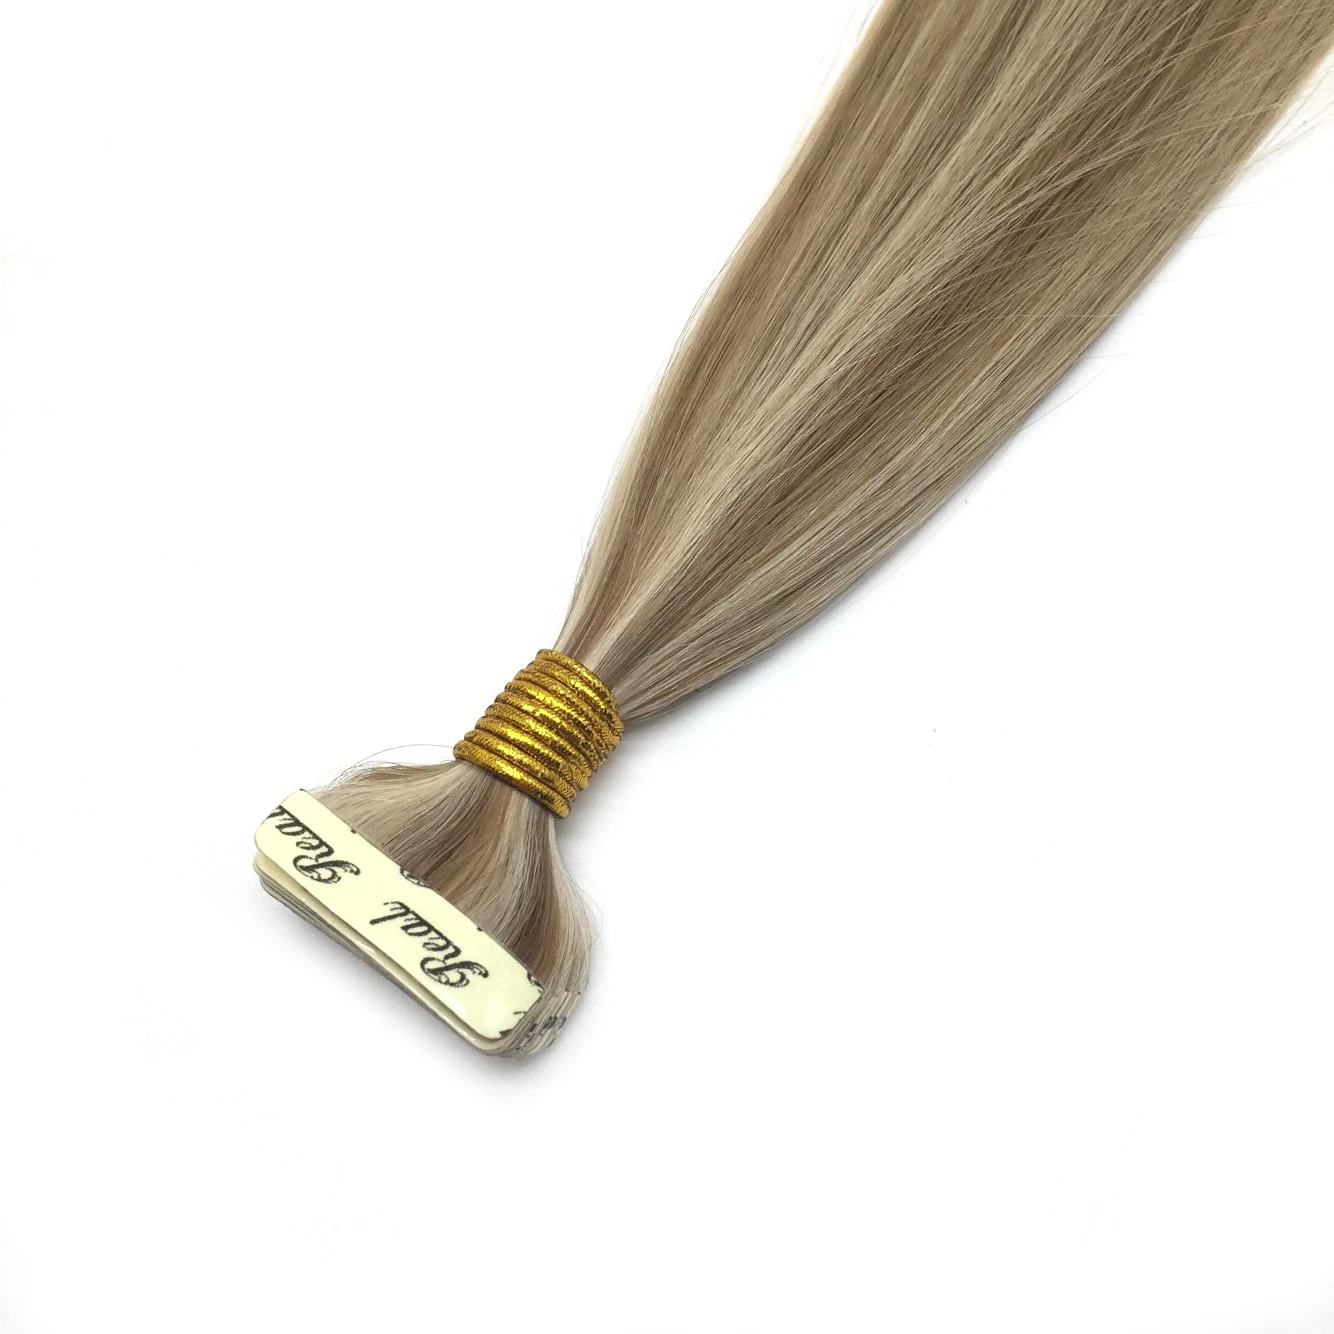 

100% Drawn Virgin Remy Hair Ombre Blonde Tape in Human Hair Russian Tape-in Hair Extensions Natural